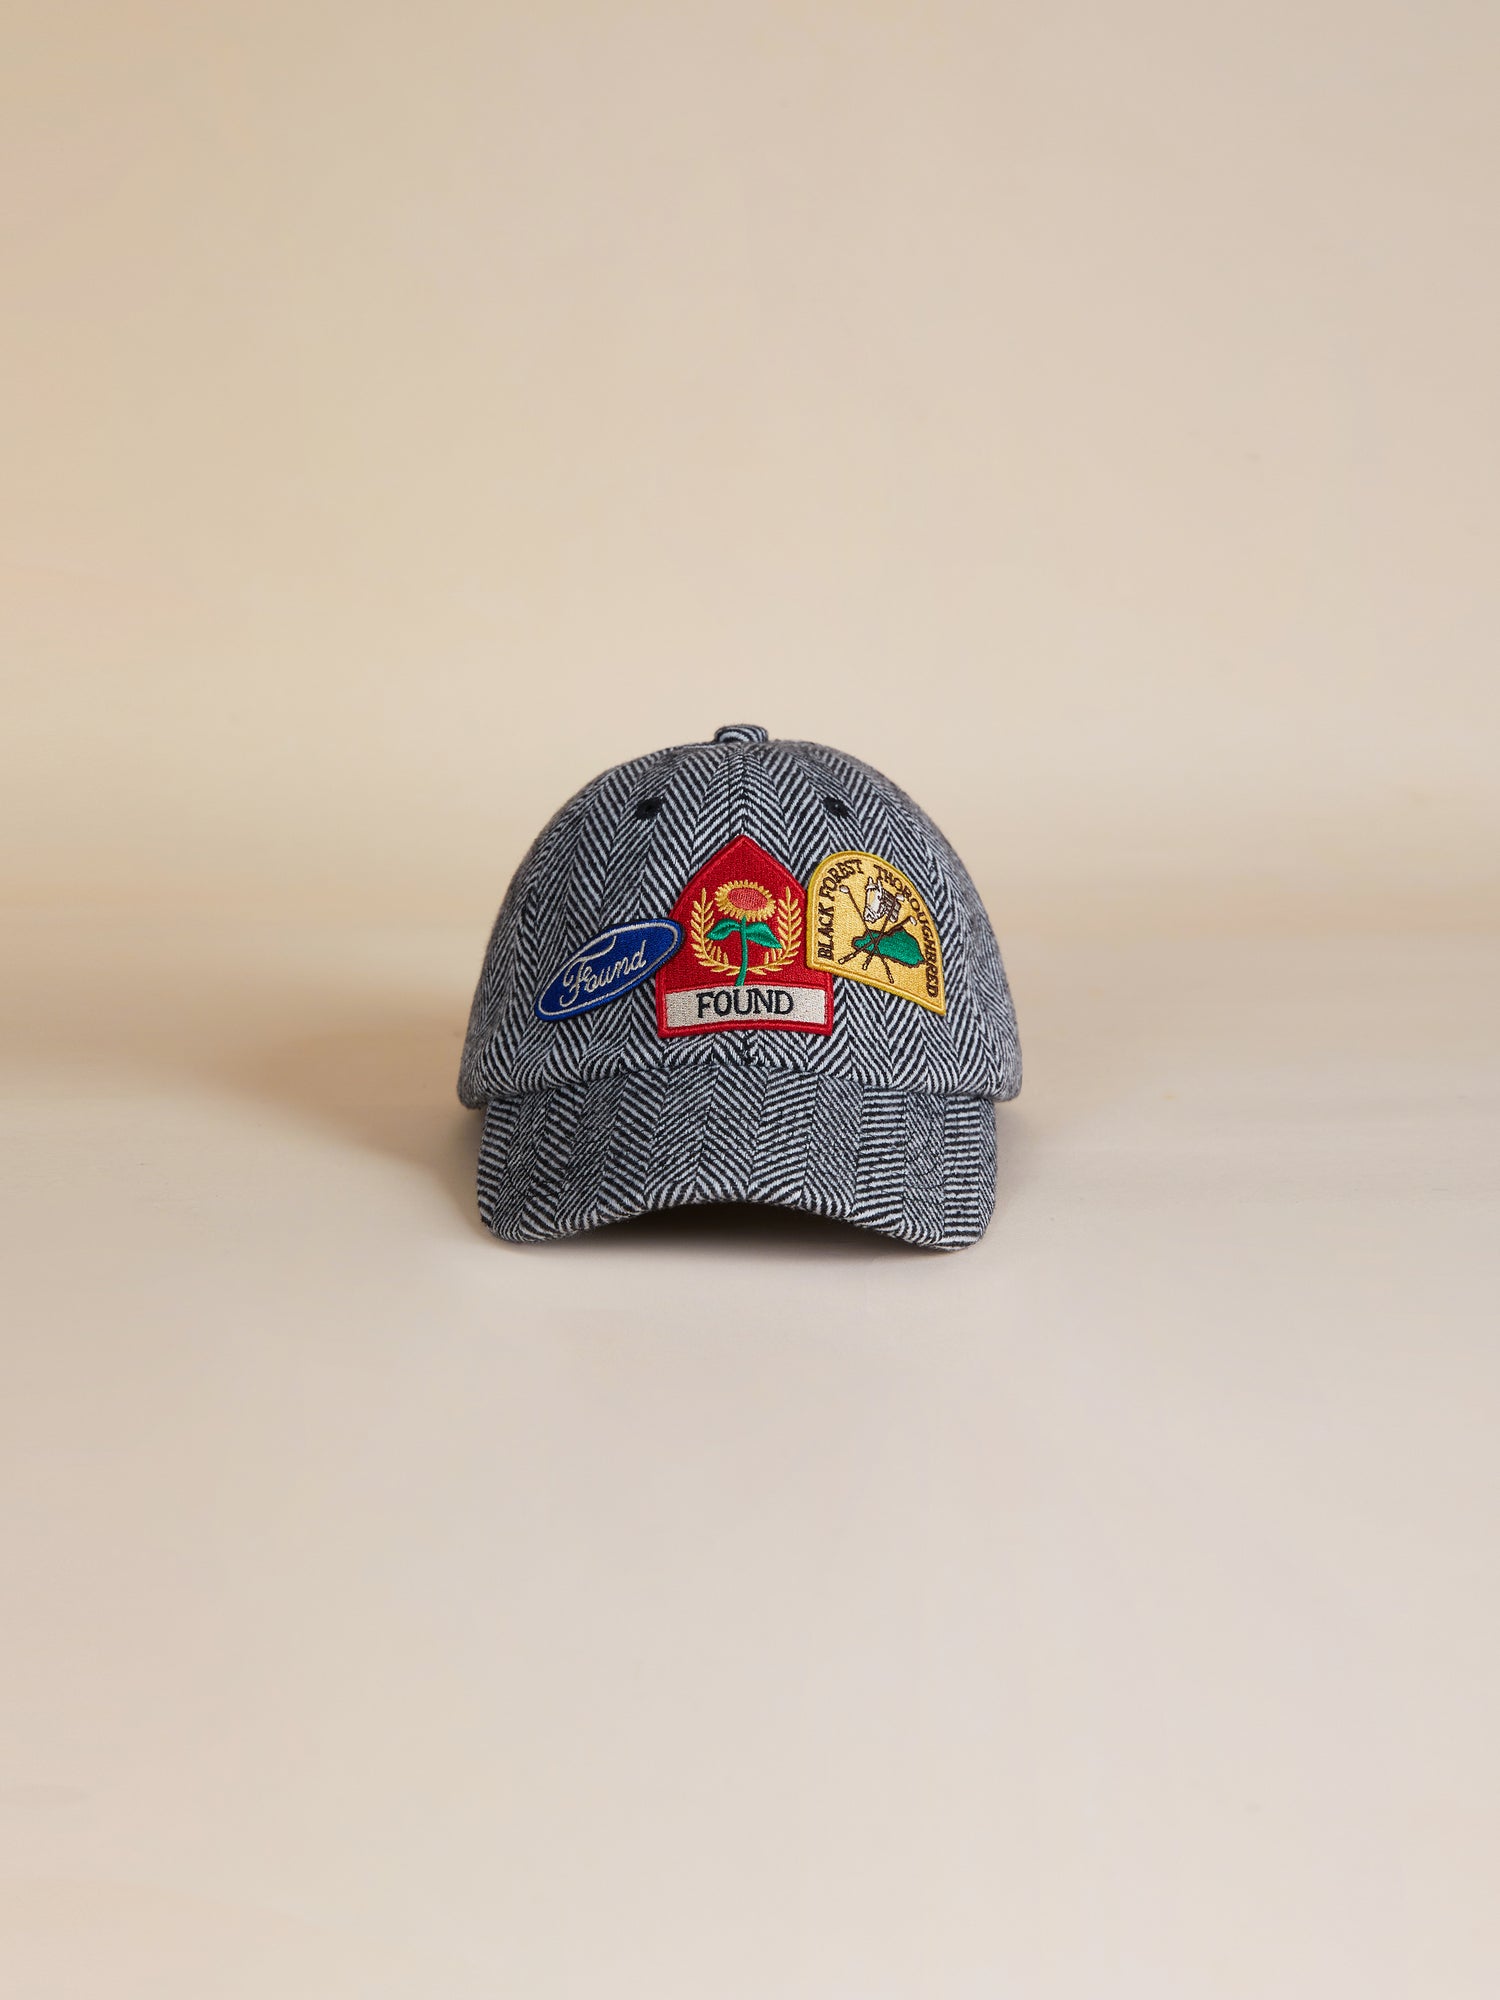 A Herringbone Tweed Patch Cap with a colorful embroidered Found logo on it.